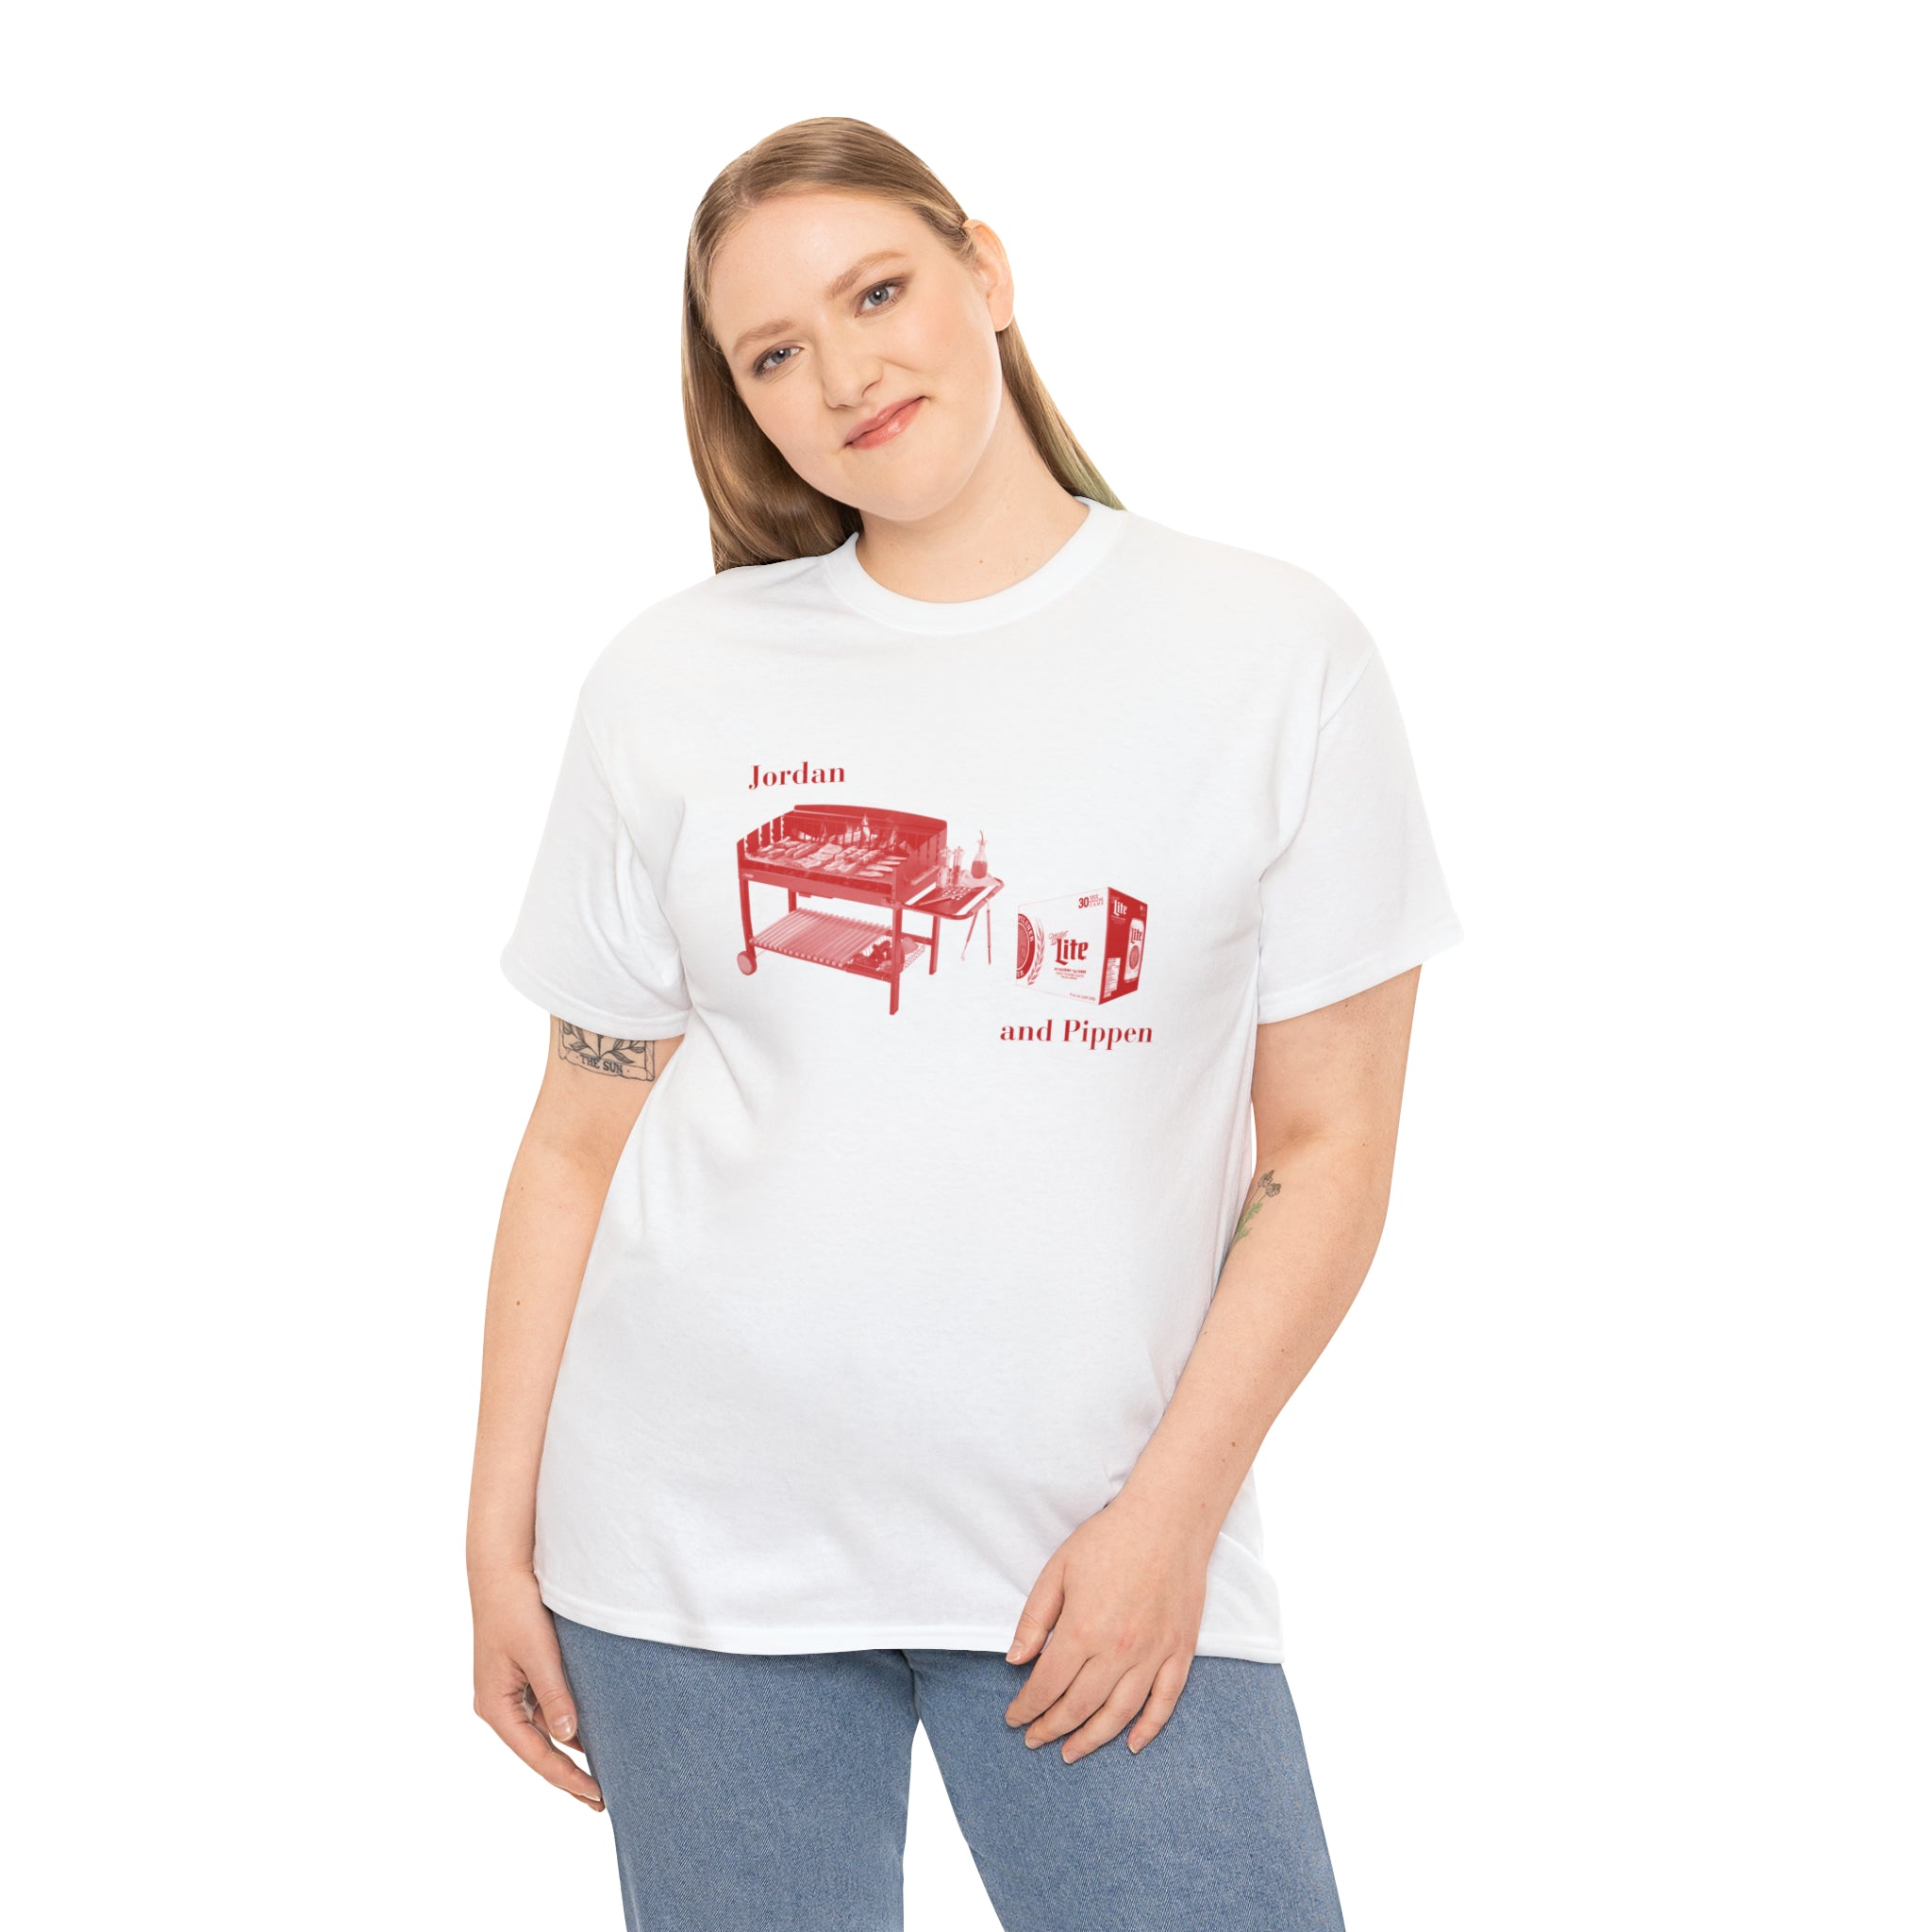 Jordan and Pippen Barbecue and 30 rack - Unisex Heavy Cotton Tee